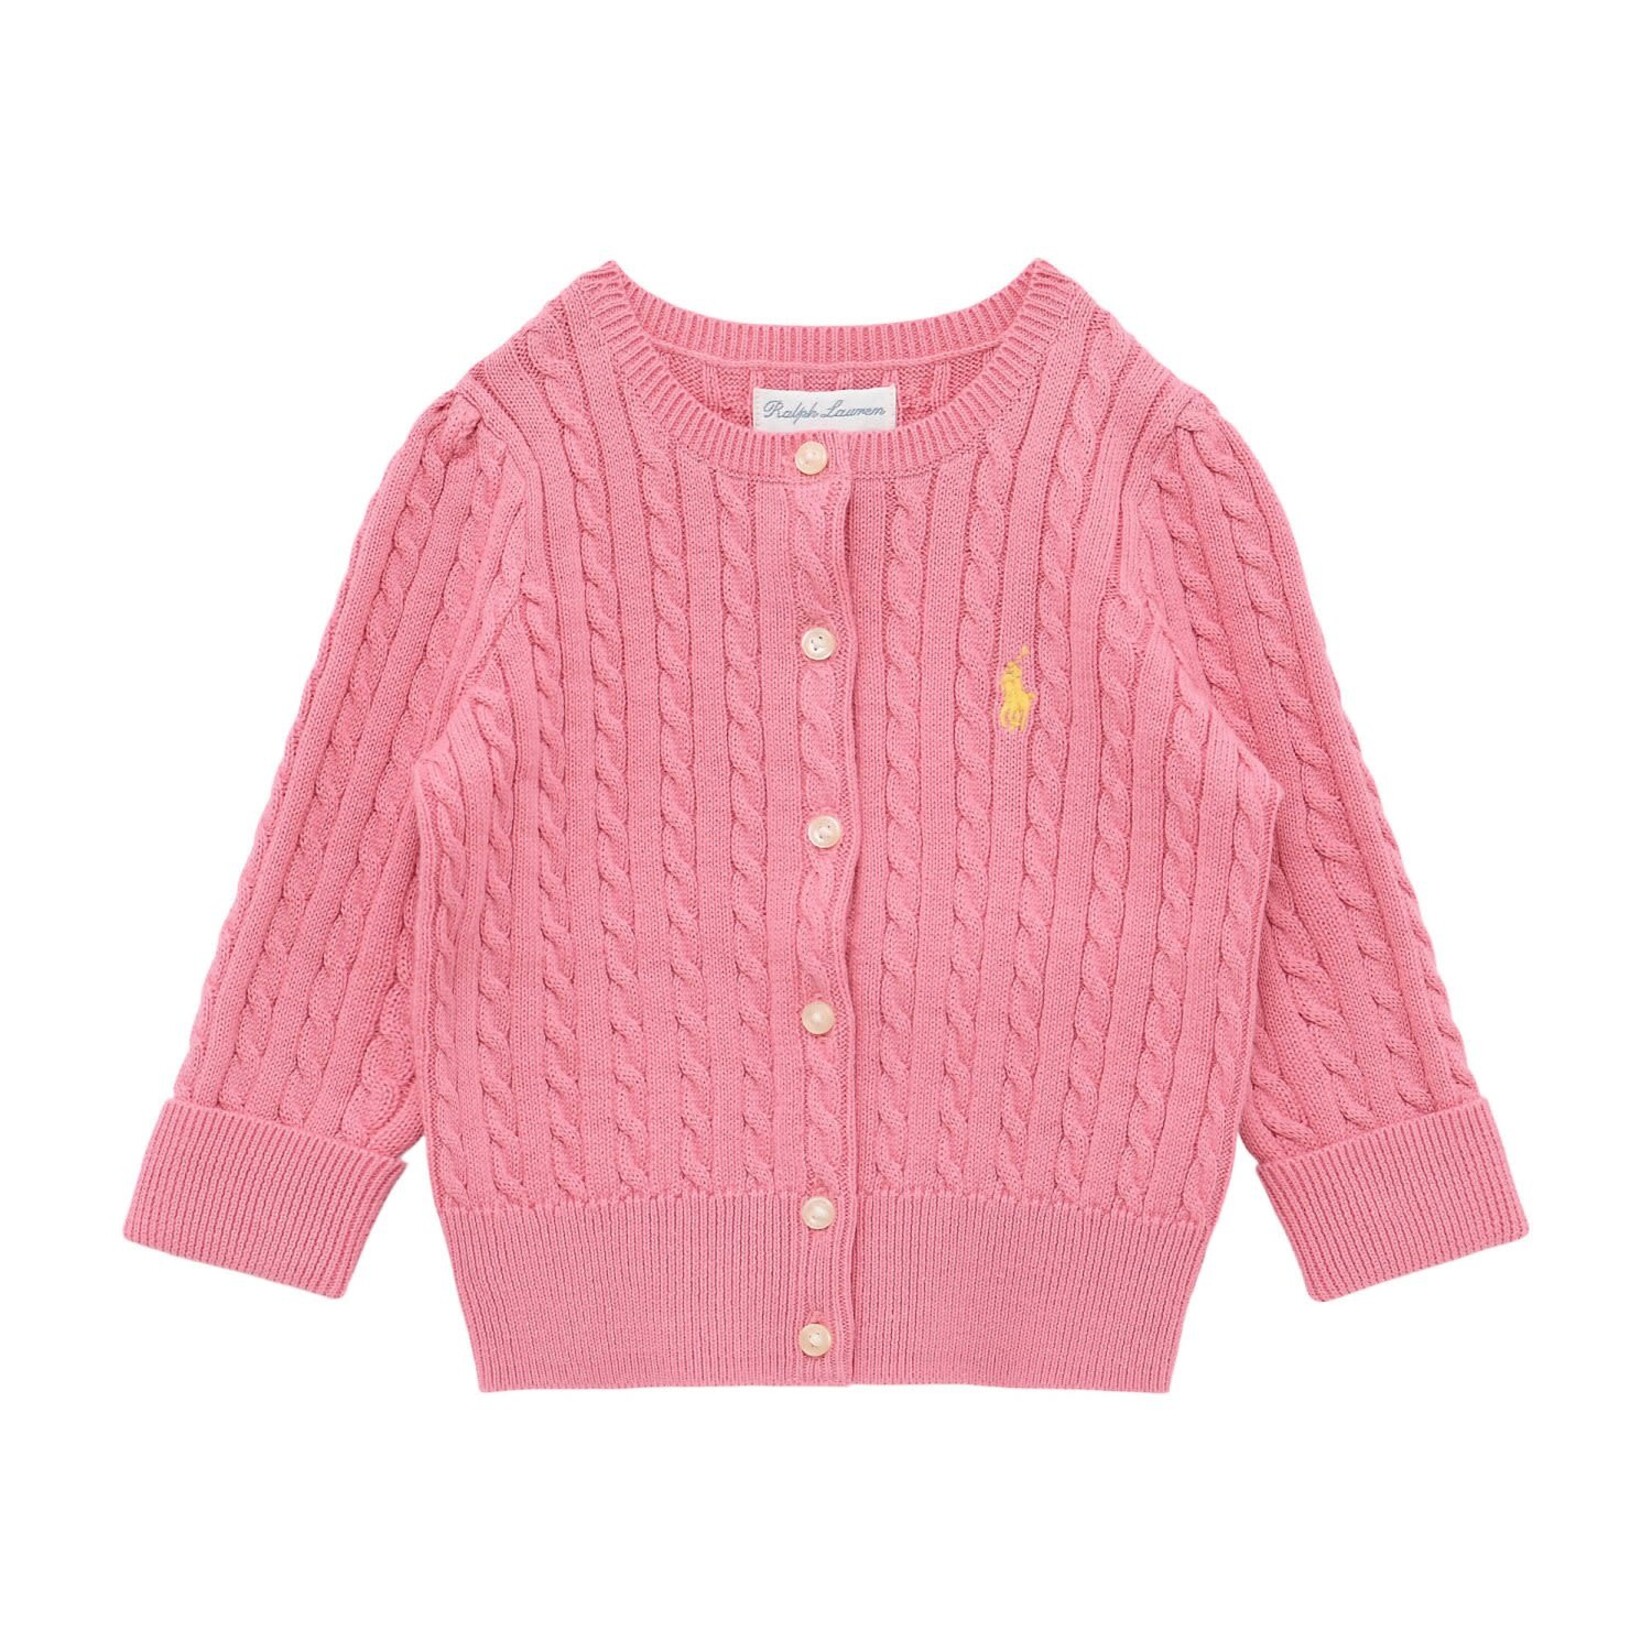 Ralph Lauren MINI CABLE-TOPS-SWEATER-FLORIDA PINK W/ OASIS YELLOW